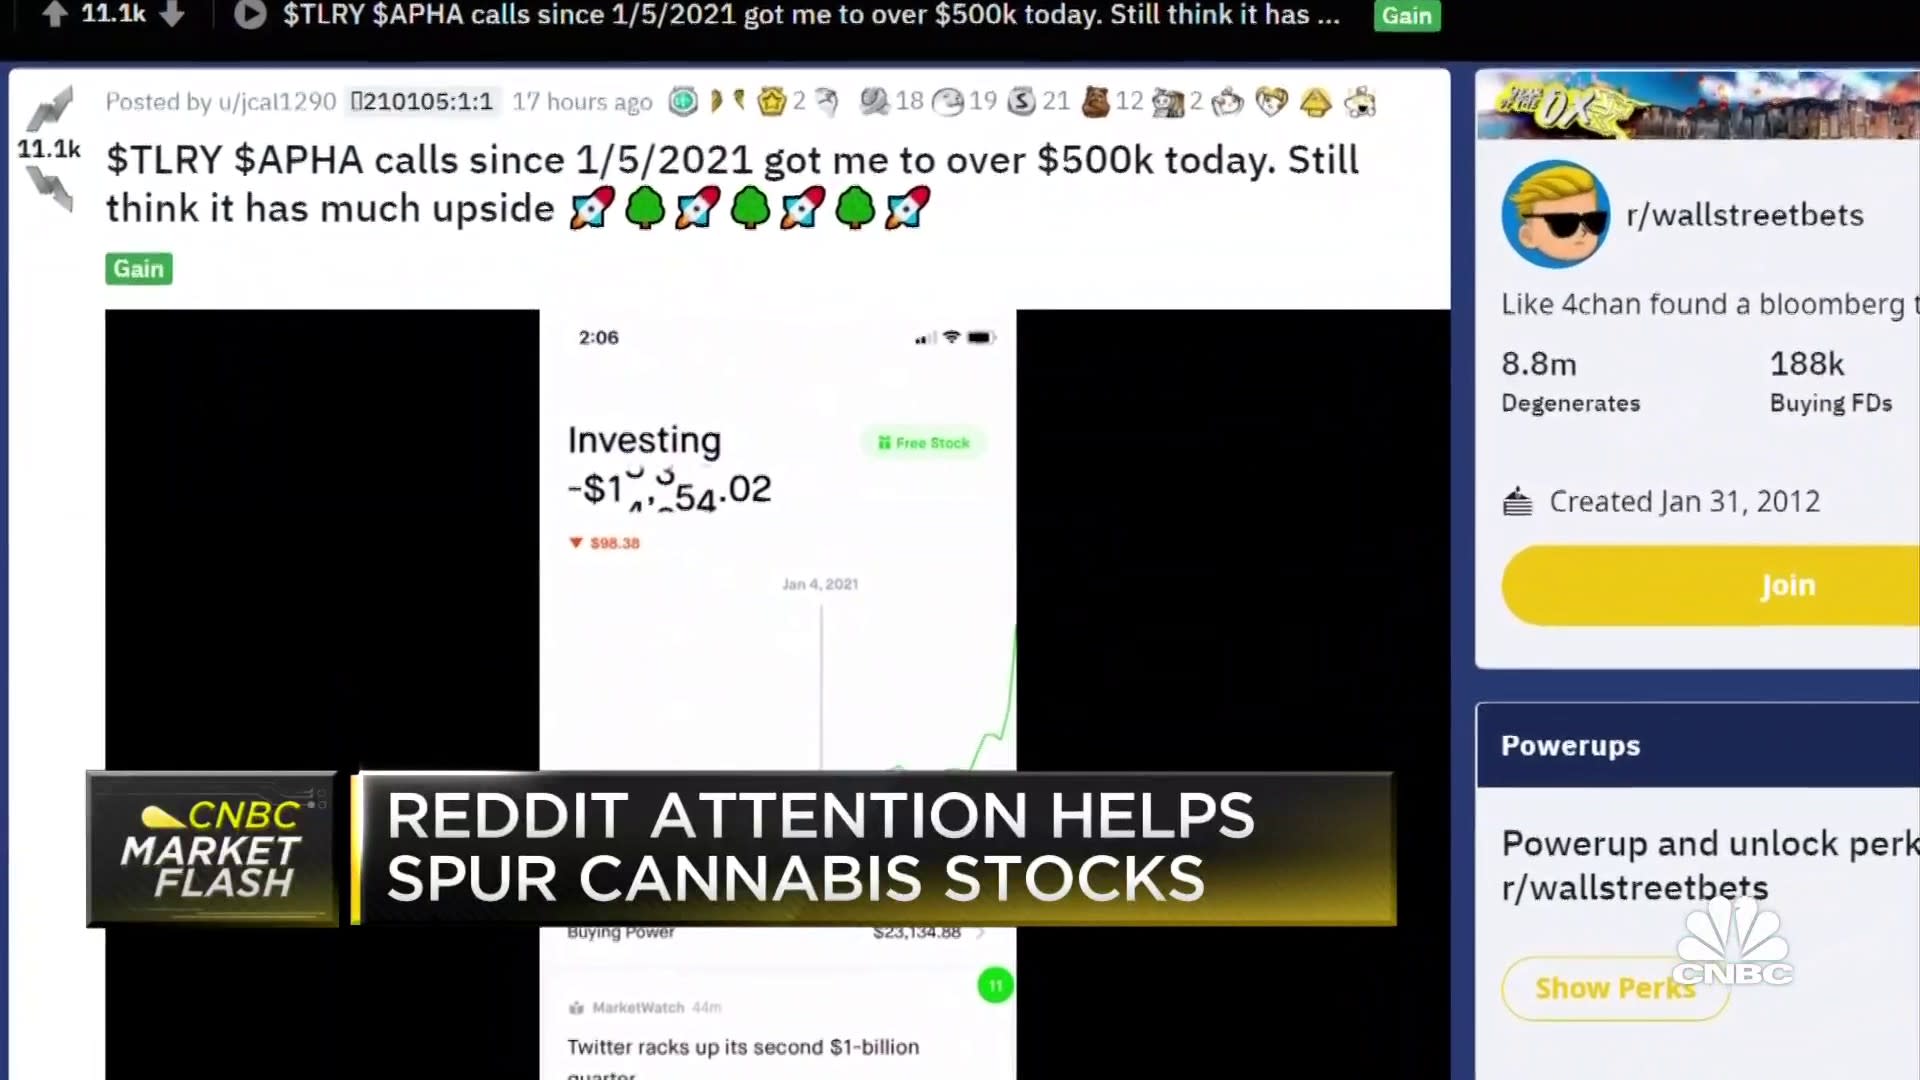 The Reddit Community Has Turned Its Attention to Weed Stocks